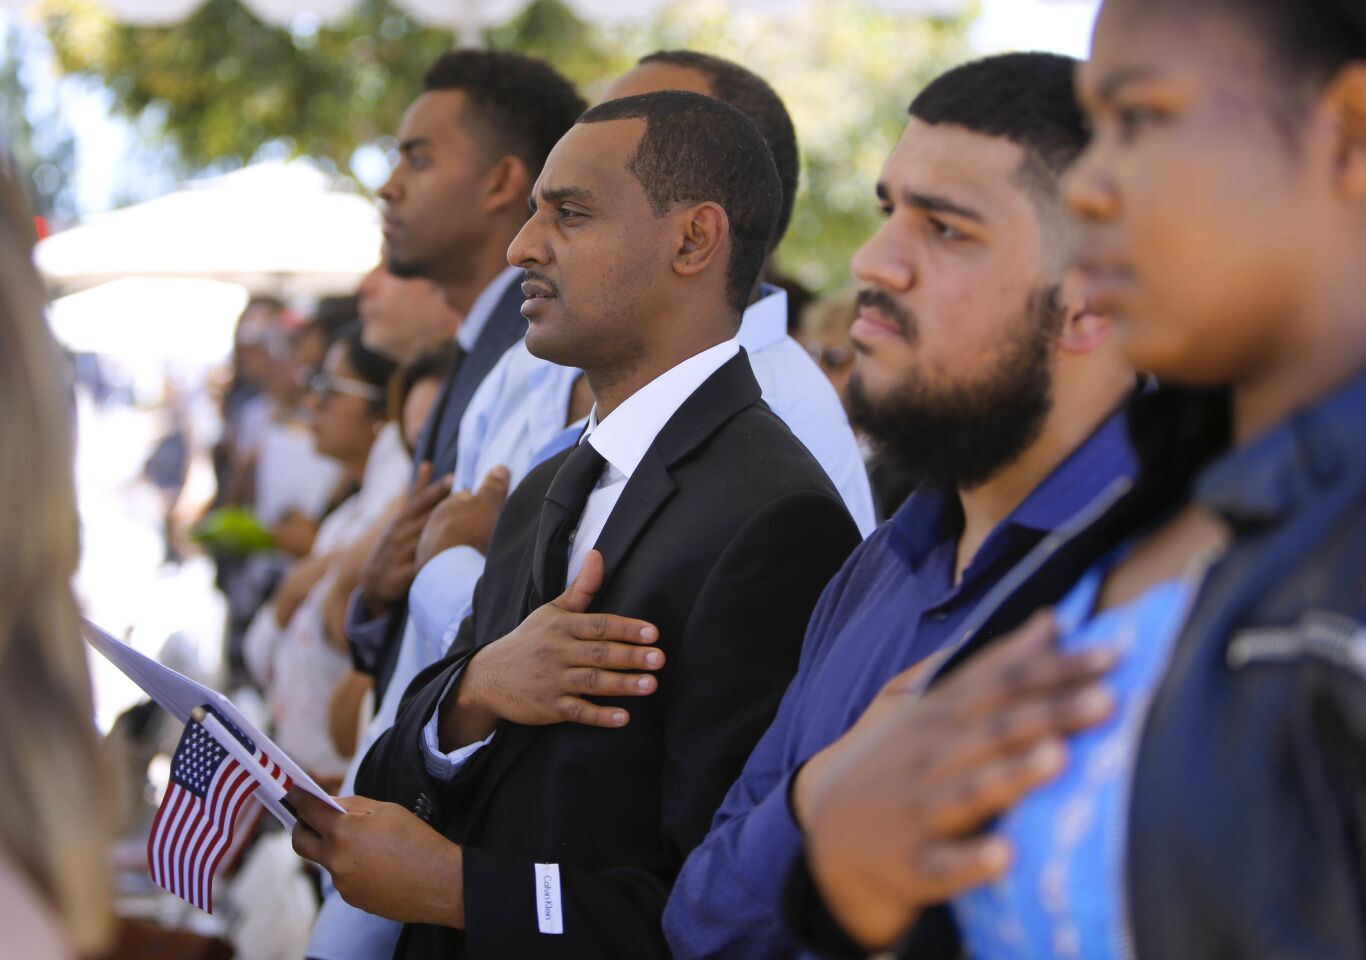 About 100 people from about 54 countries took the Oath of Allegiance to the United States of America and became U.S. citizens during a naturalization ceremony held in Centennial Plaza near El Cajon City Hall to kickoff El Cajon's, America on Main Street festivities.